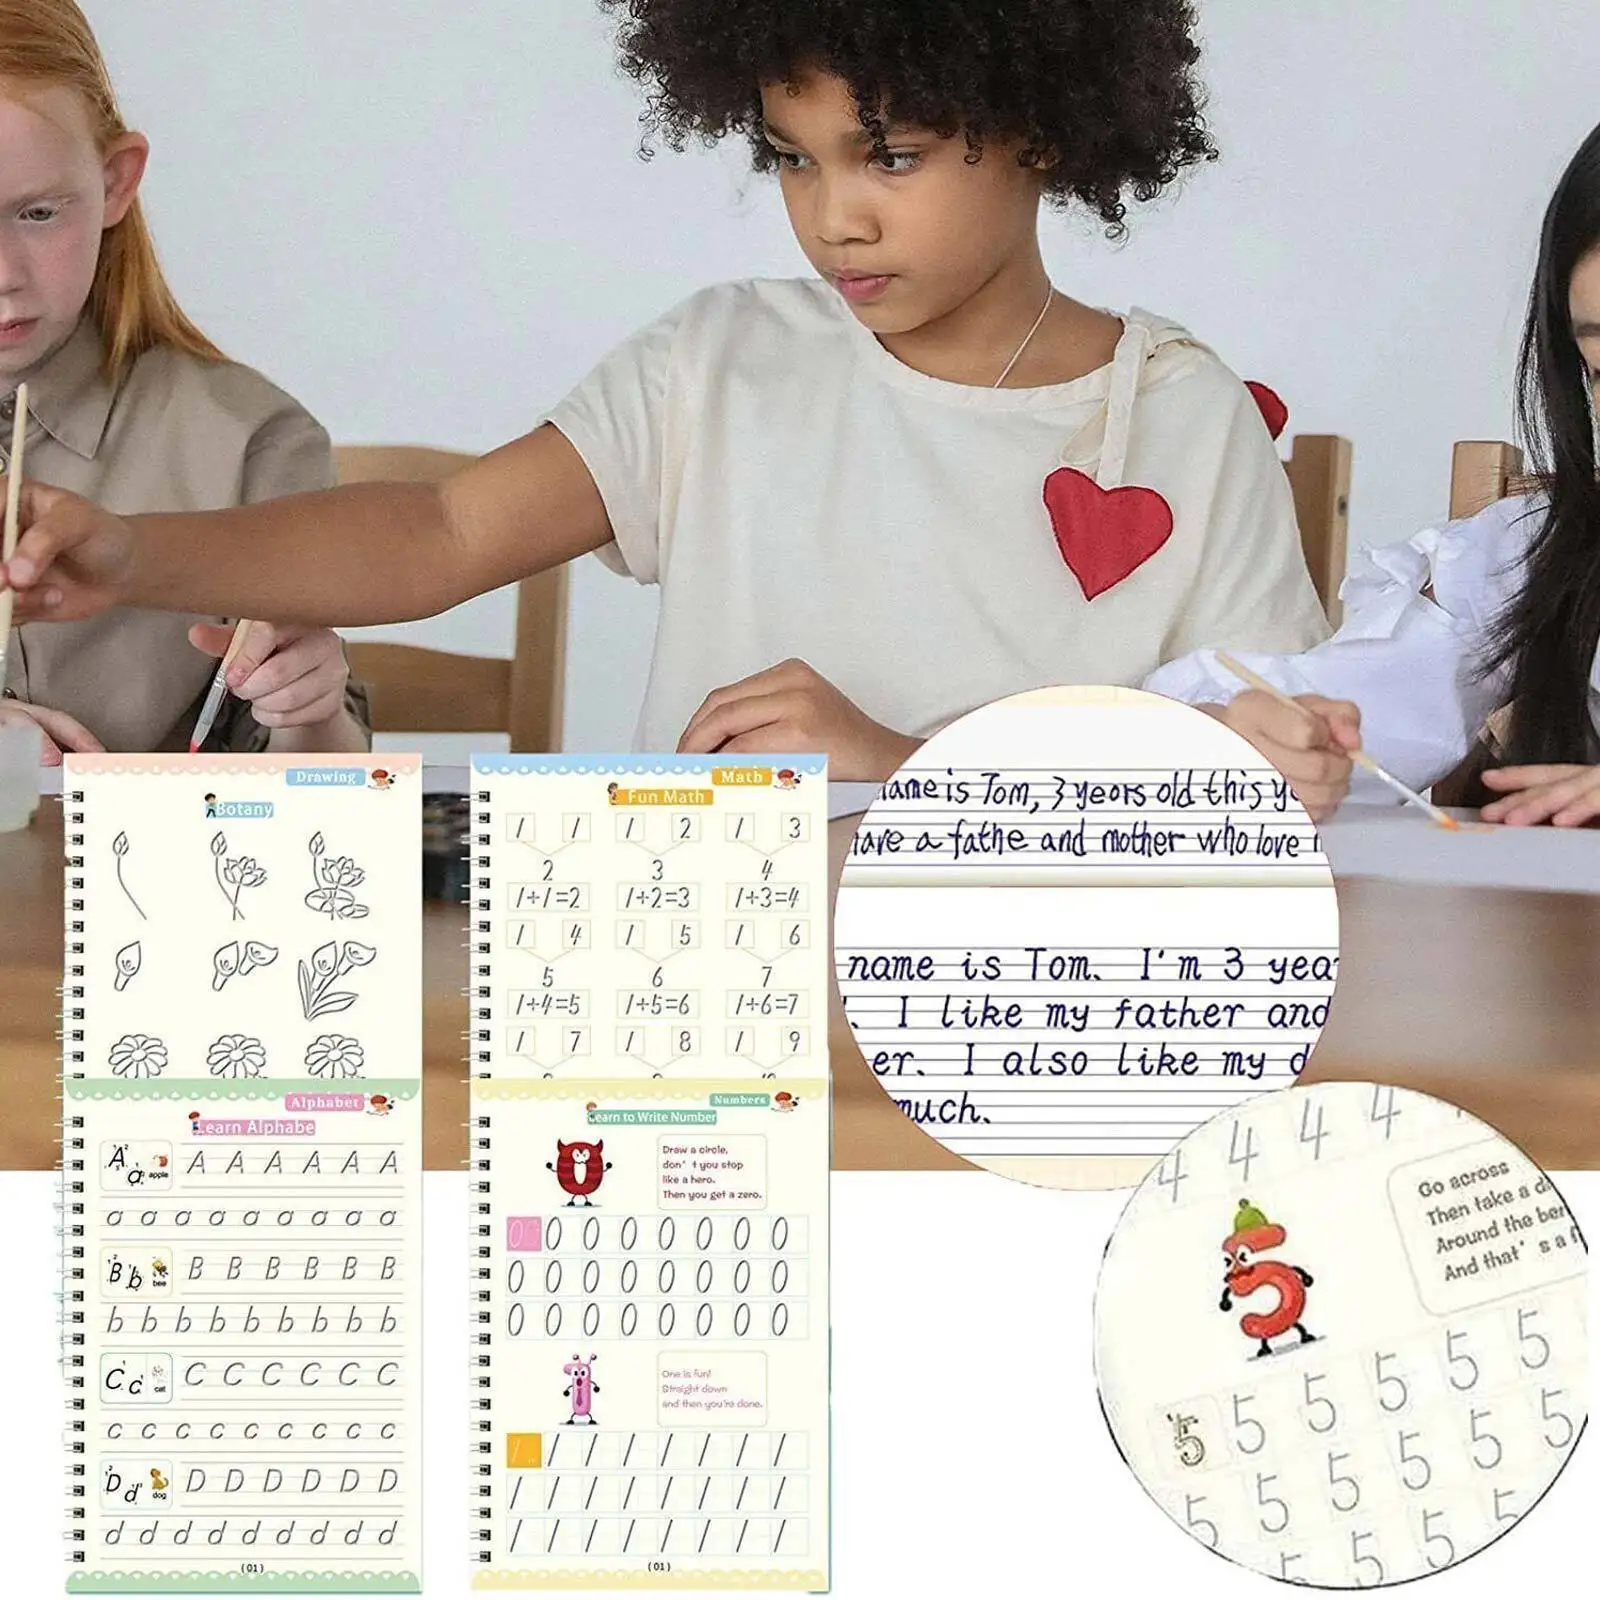 NEW GROOVD MAGIC Copybook Grooved Children's Handwriting Book